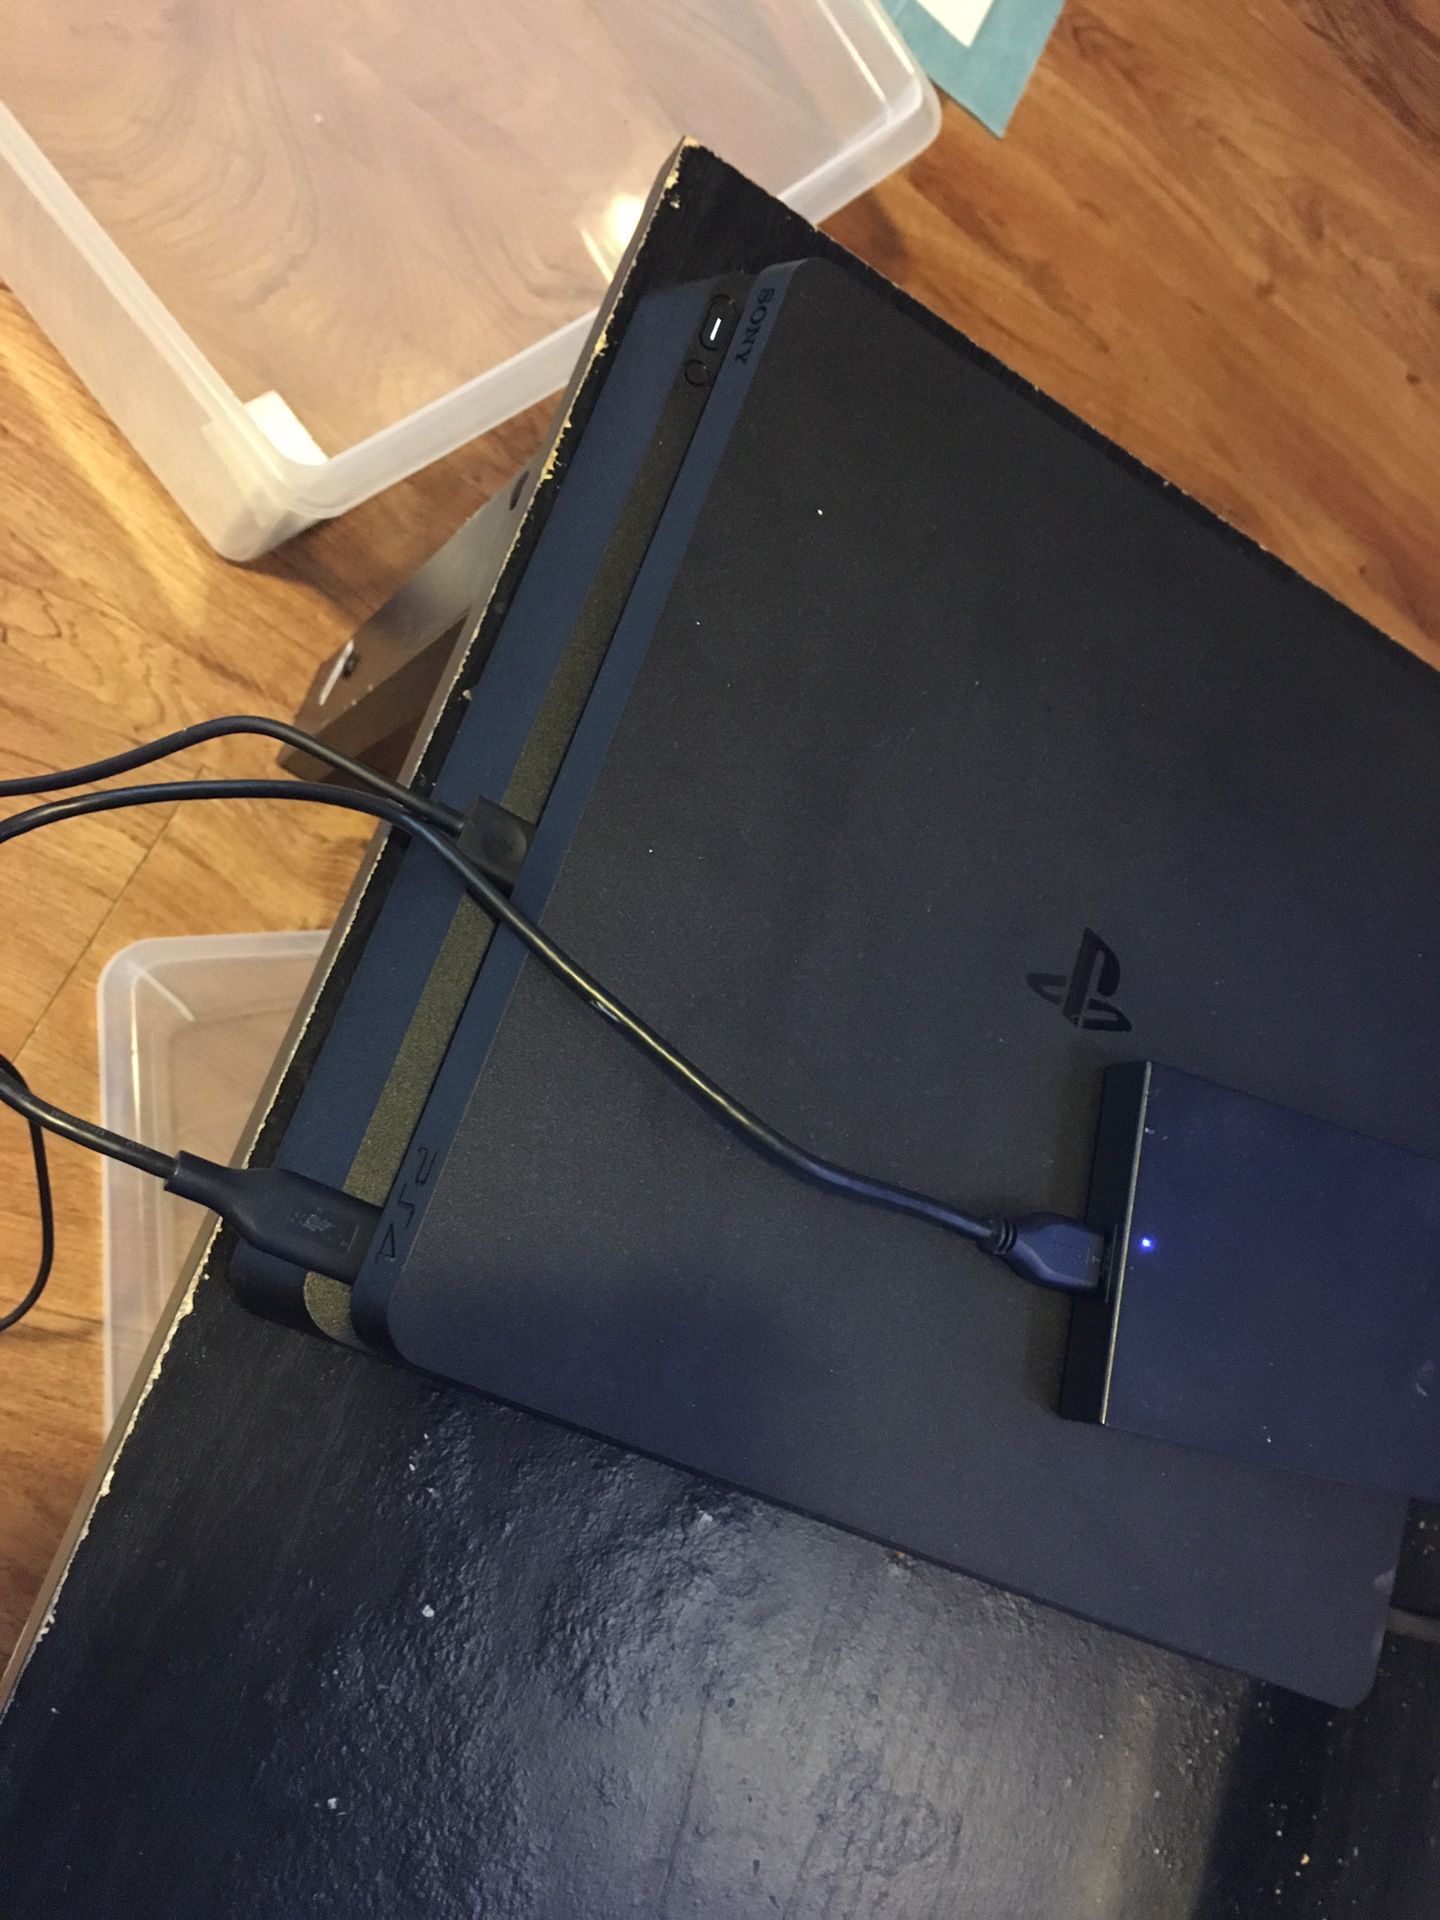 PS4 Slim 1tb plus games and gear